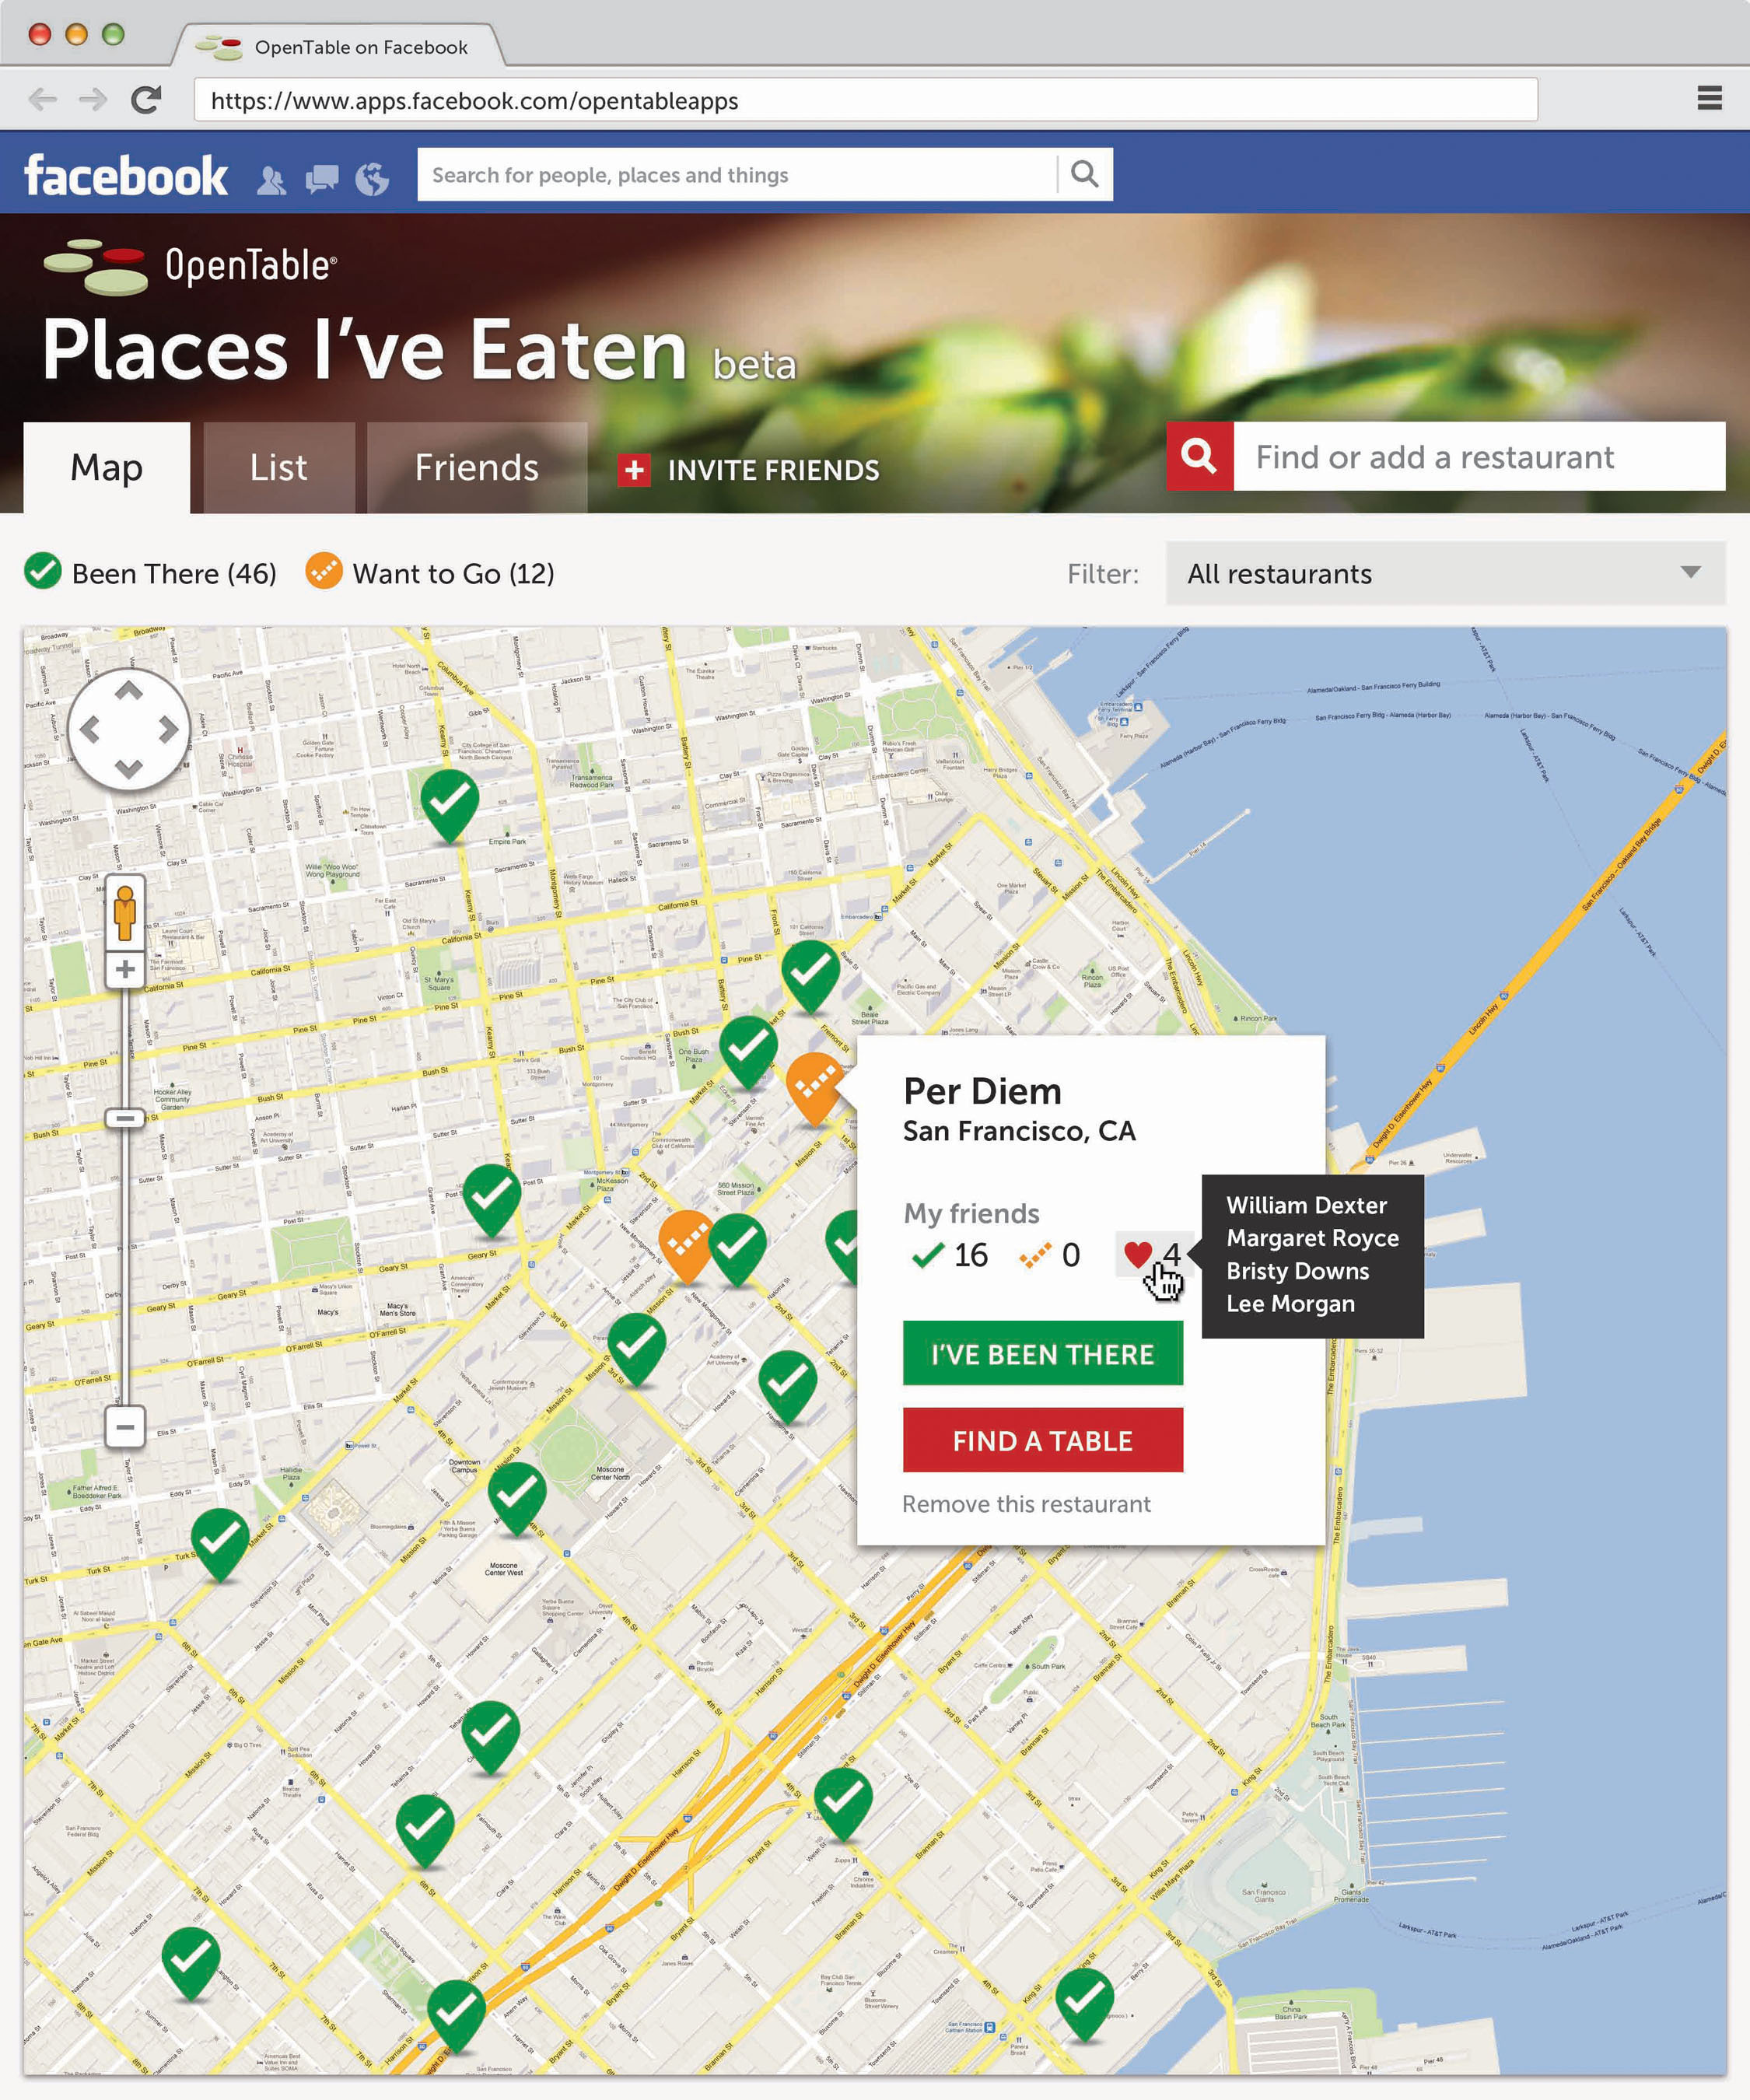 New social apps help diners share restaurant experiences, but may raise privacy questions